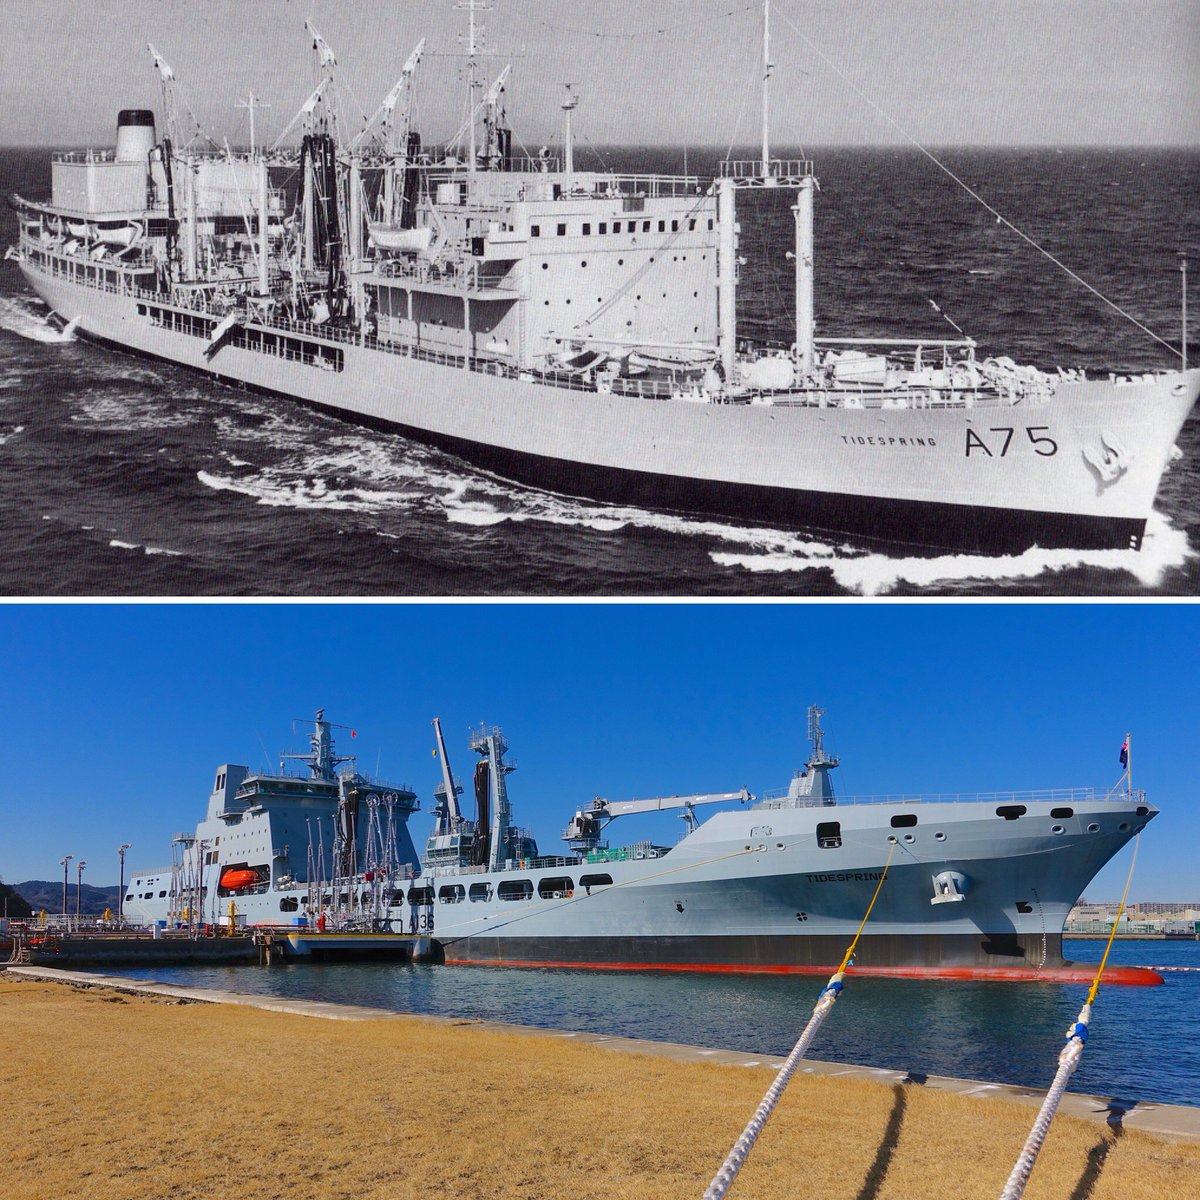 .@RFATidespring 2 fine ships 55 years apart. Evolution not revolution A75 to (+) 61 

#RoyalTweetAuxiliary